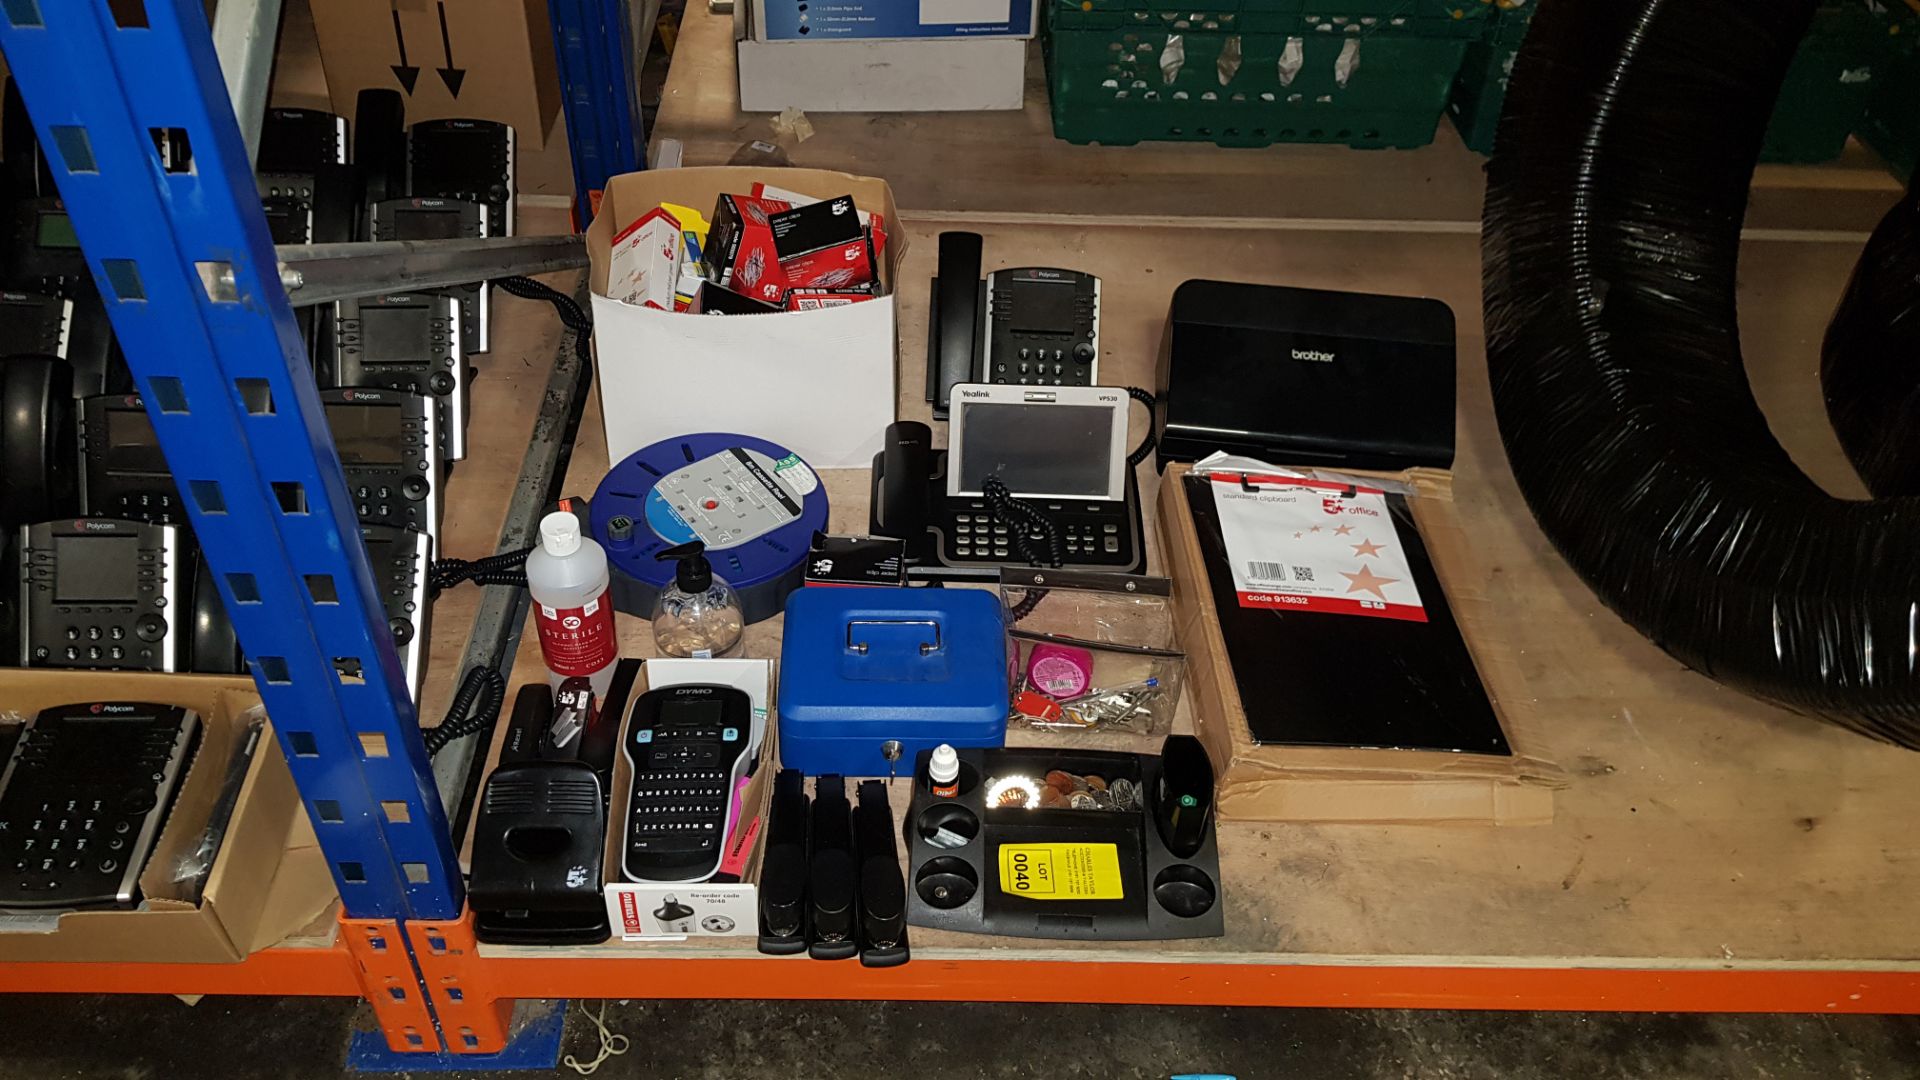 APPROX 60 + PIECE MIXED OFFICE LOT CONTAINING DYMO LABELMANAGER 160,BROTHER ADS2010 MINI PRINTER,